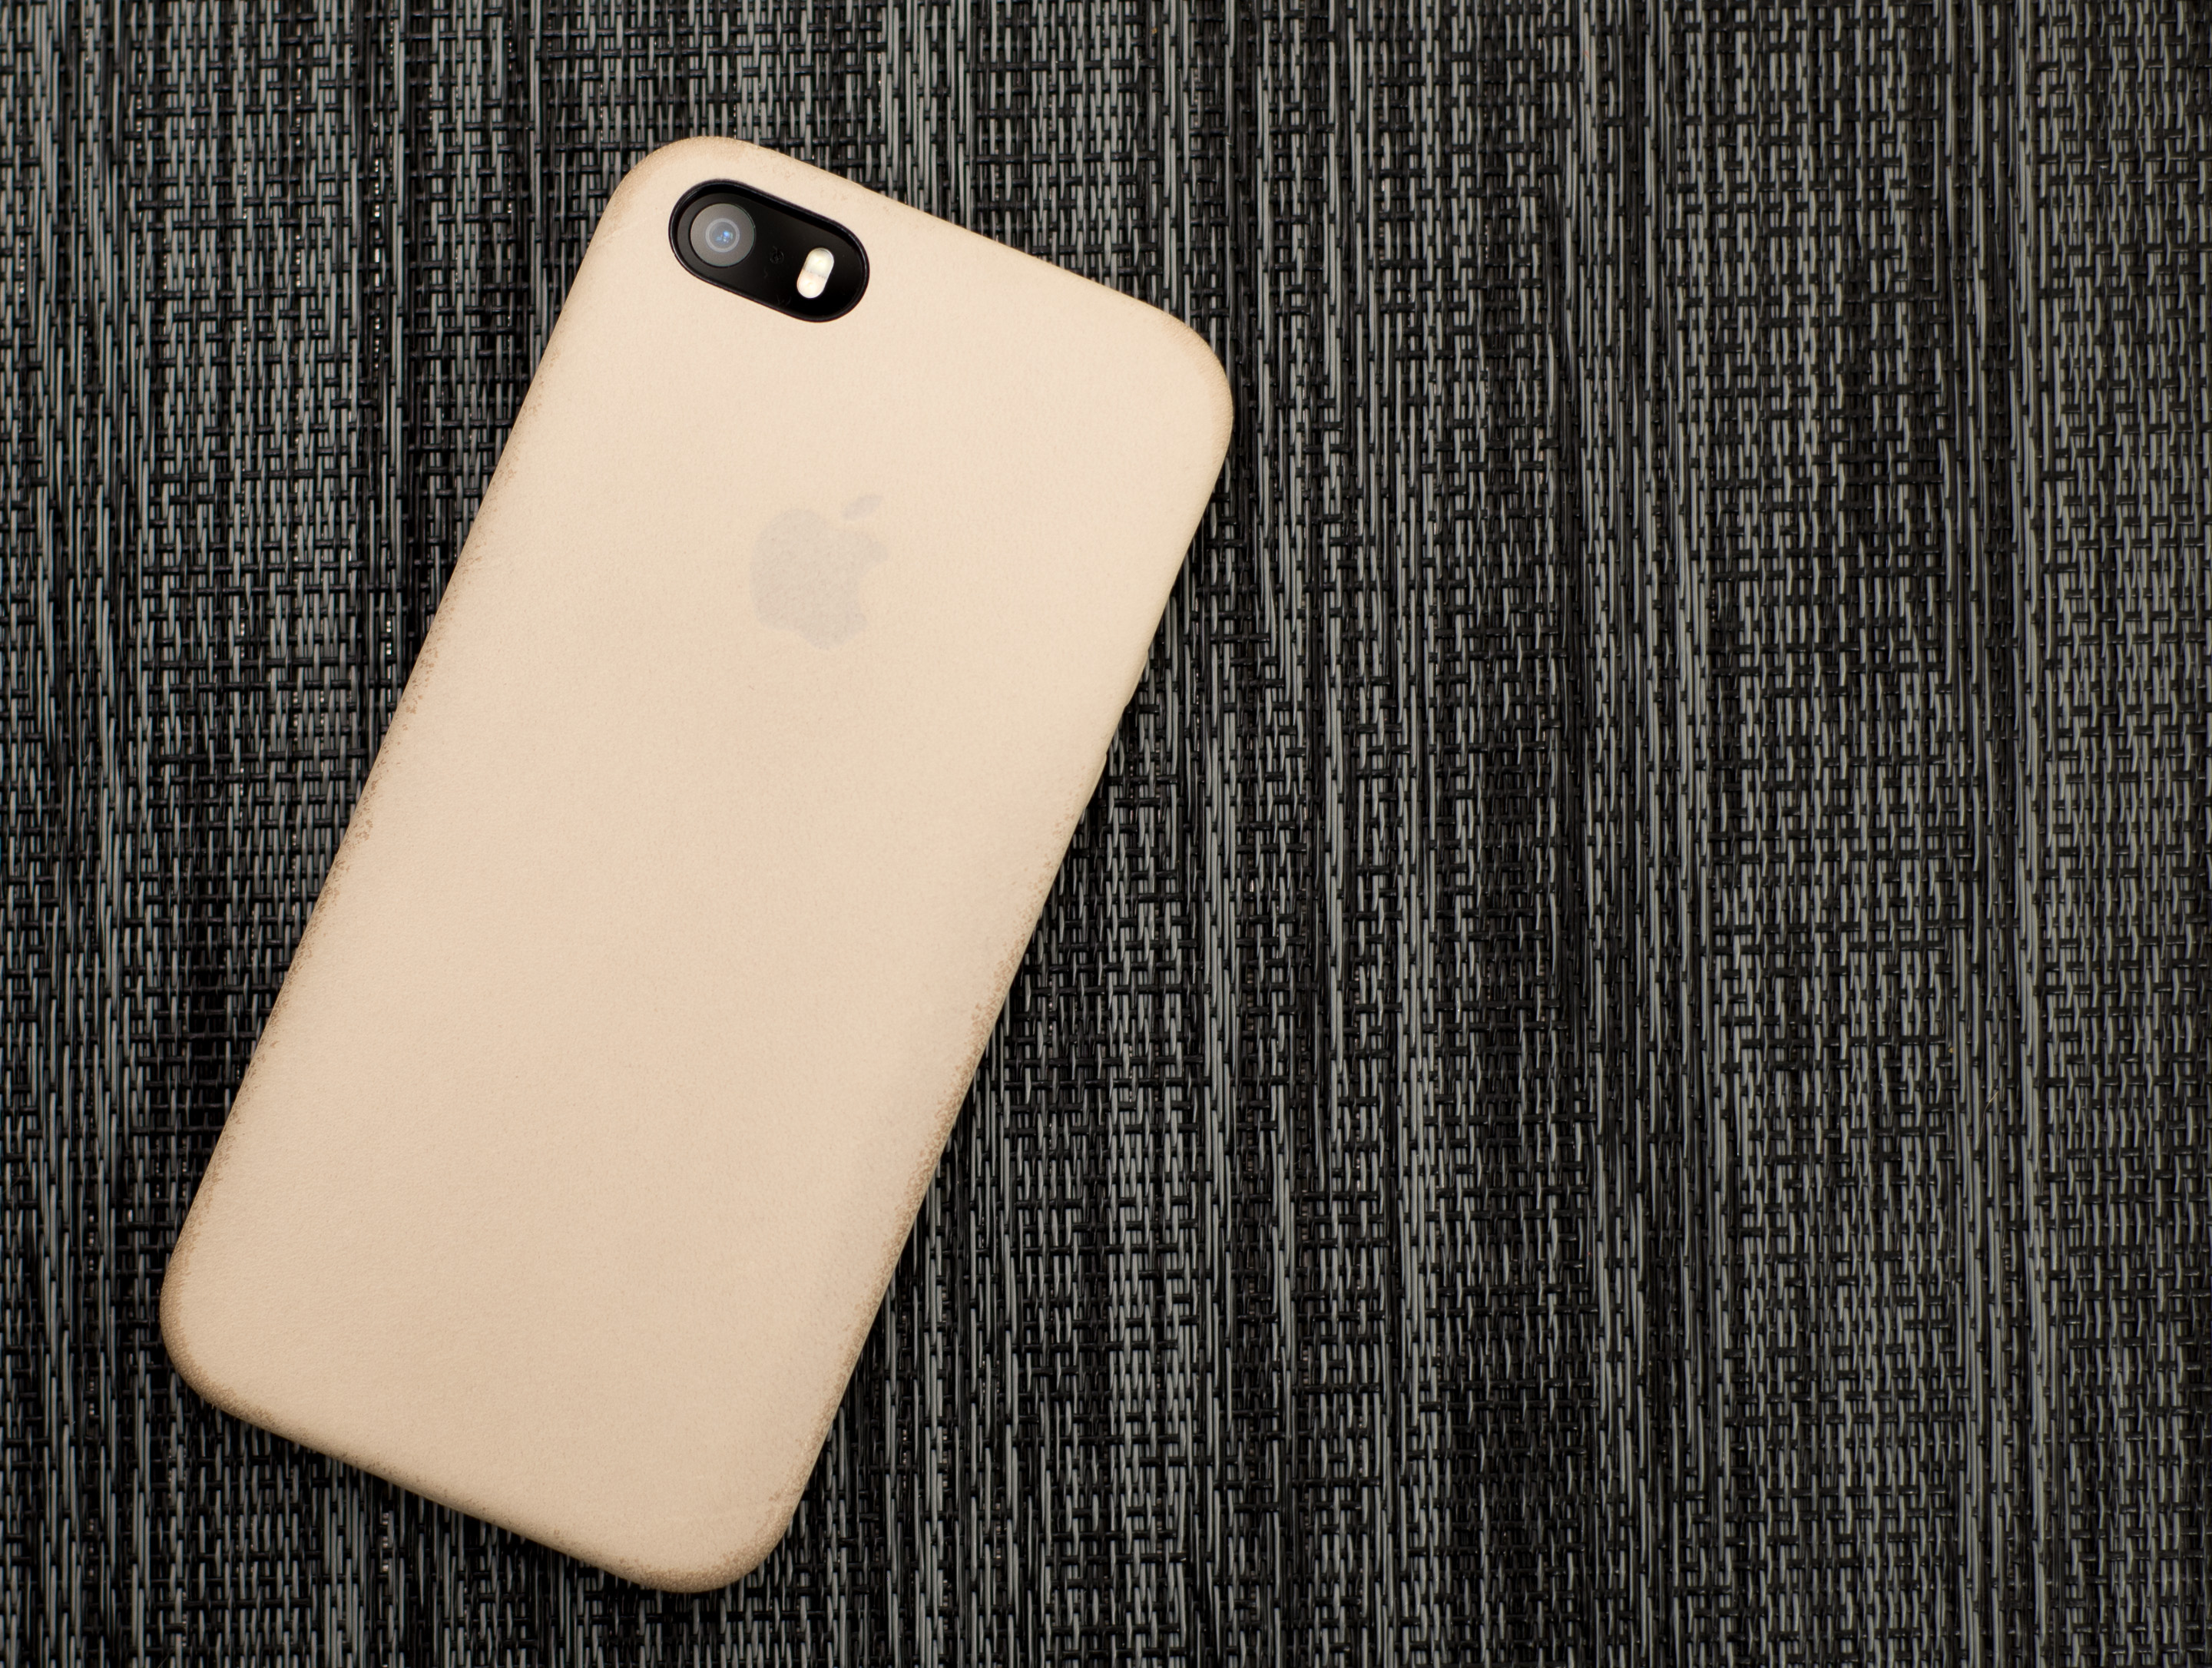 The Iphone 5s Review